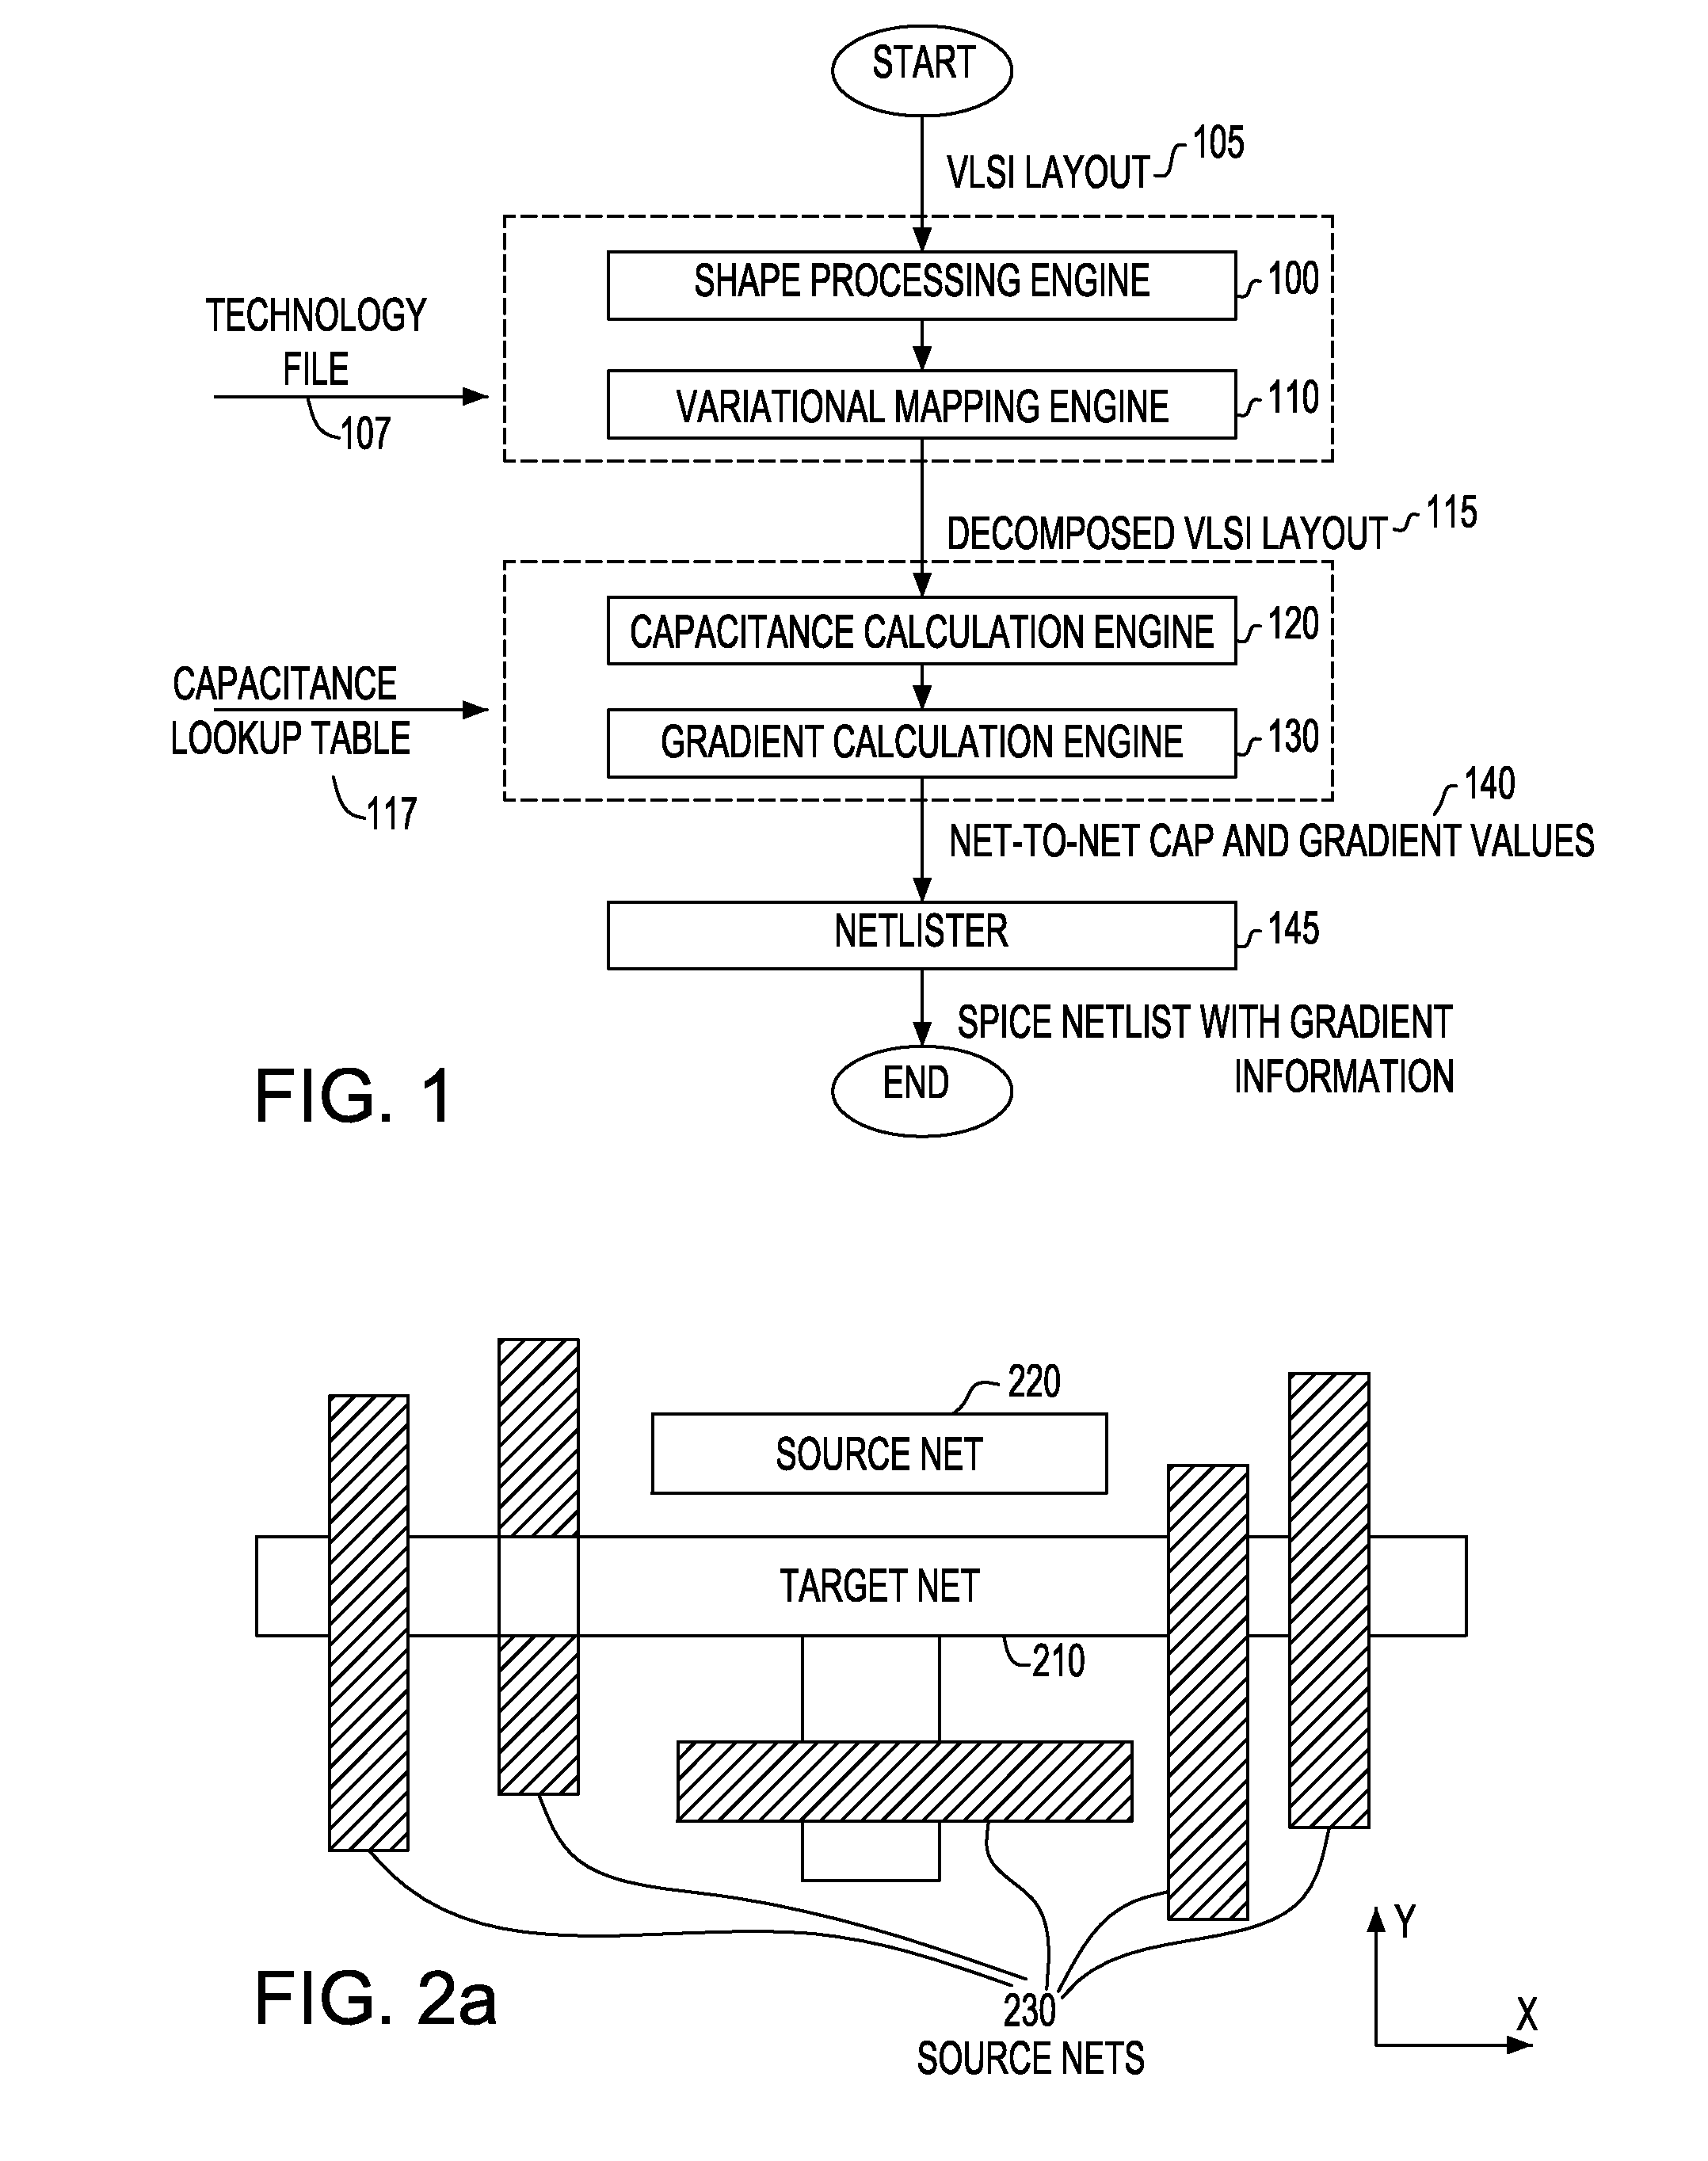 Method for Calculating Capacitance Gradients in VLSI Layouts Using A Shape Processing Engine